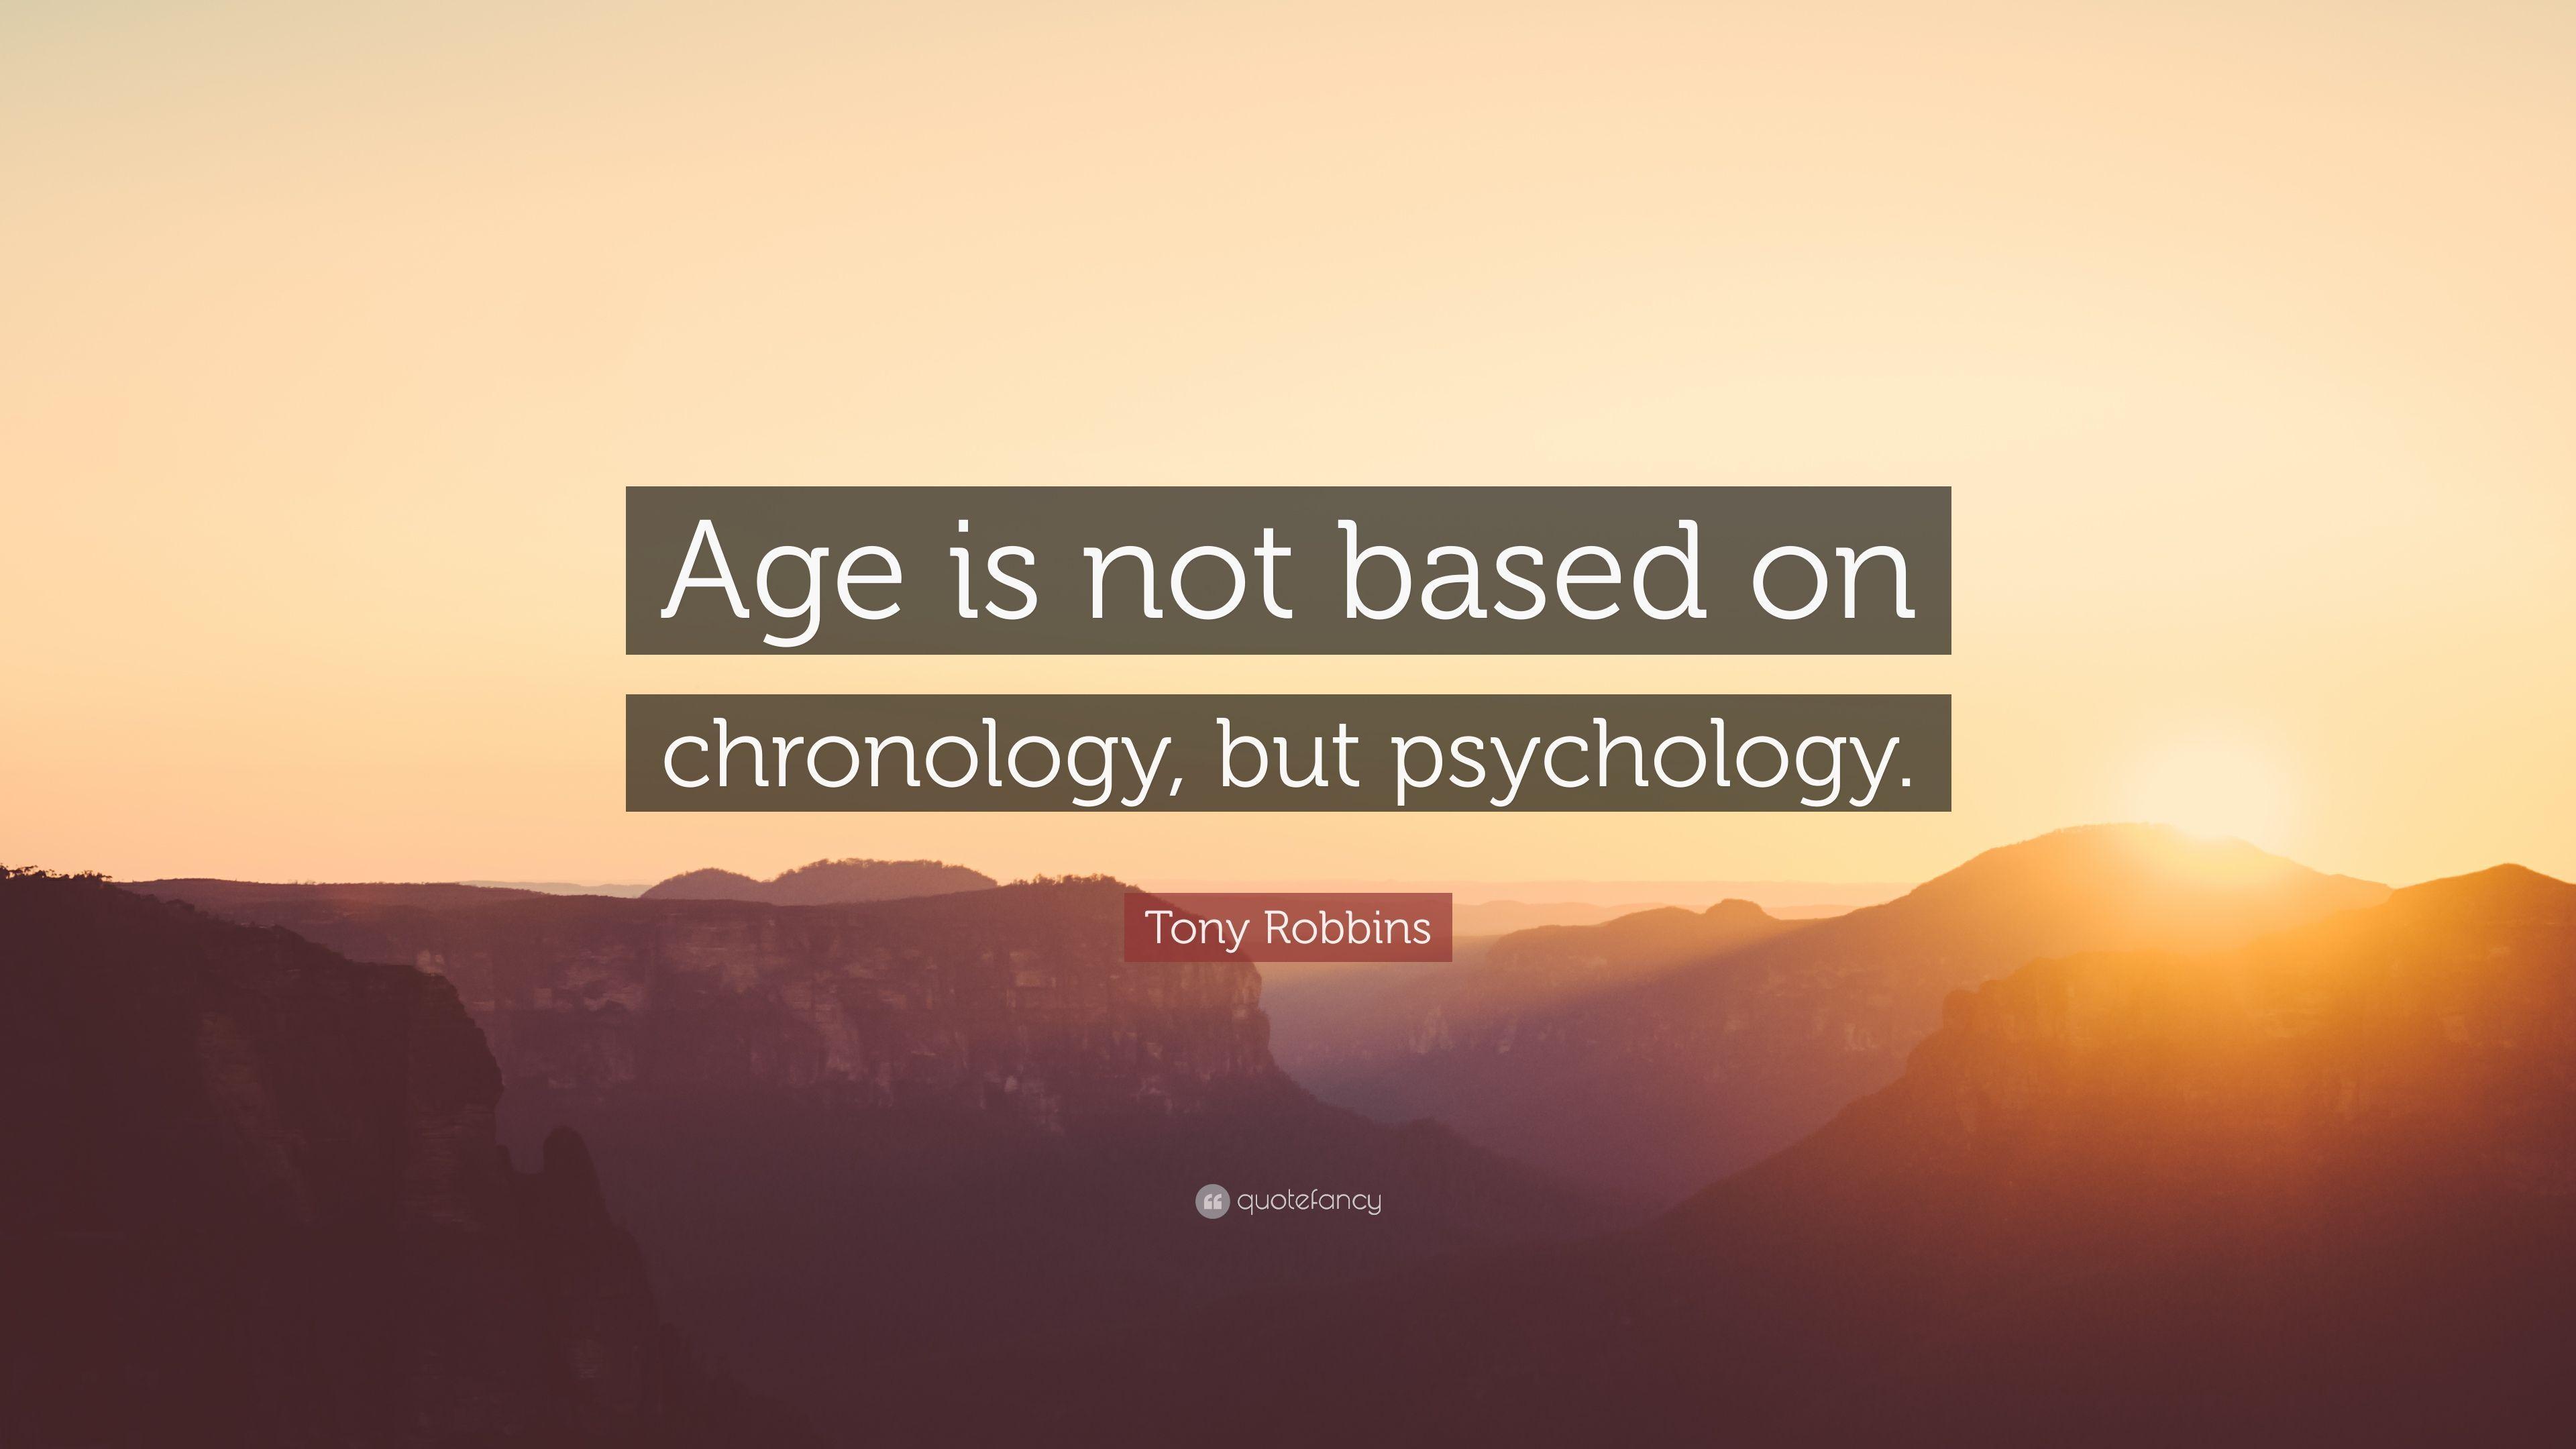 Tony Robbins Quote: “Age is not based on chronology, but